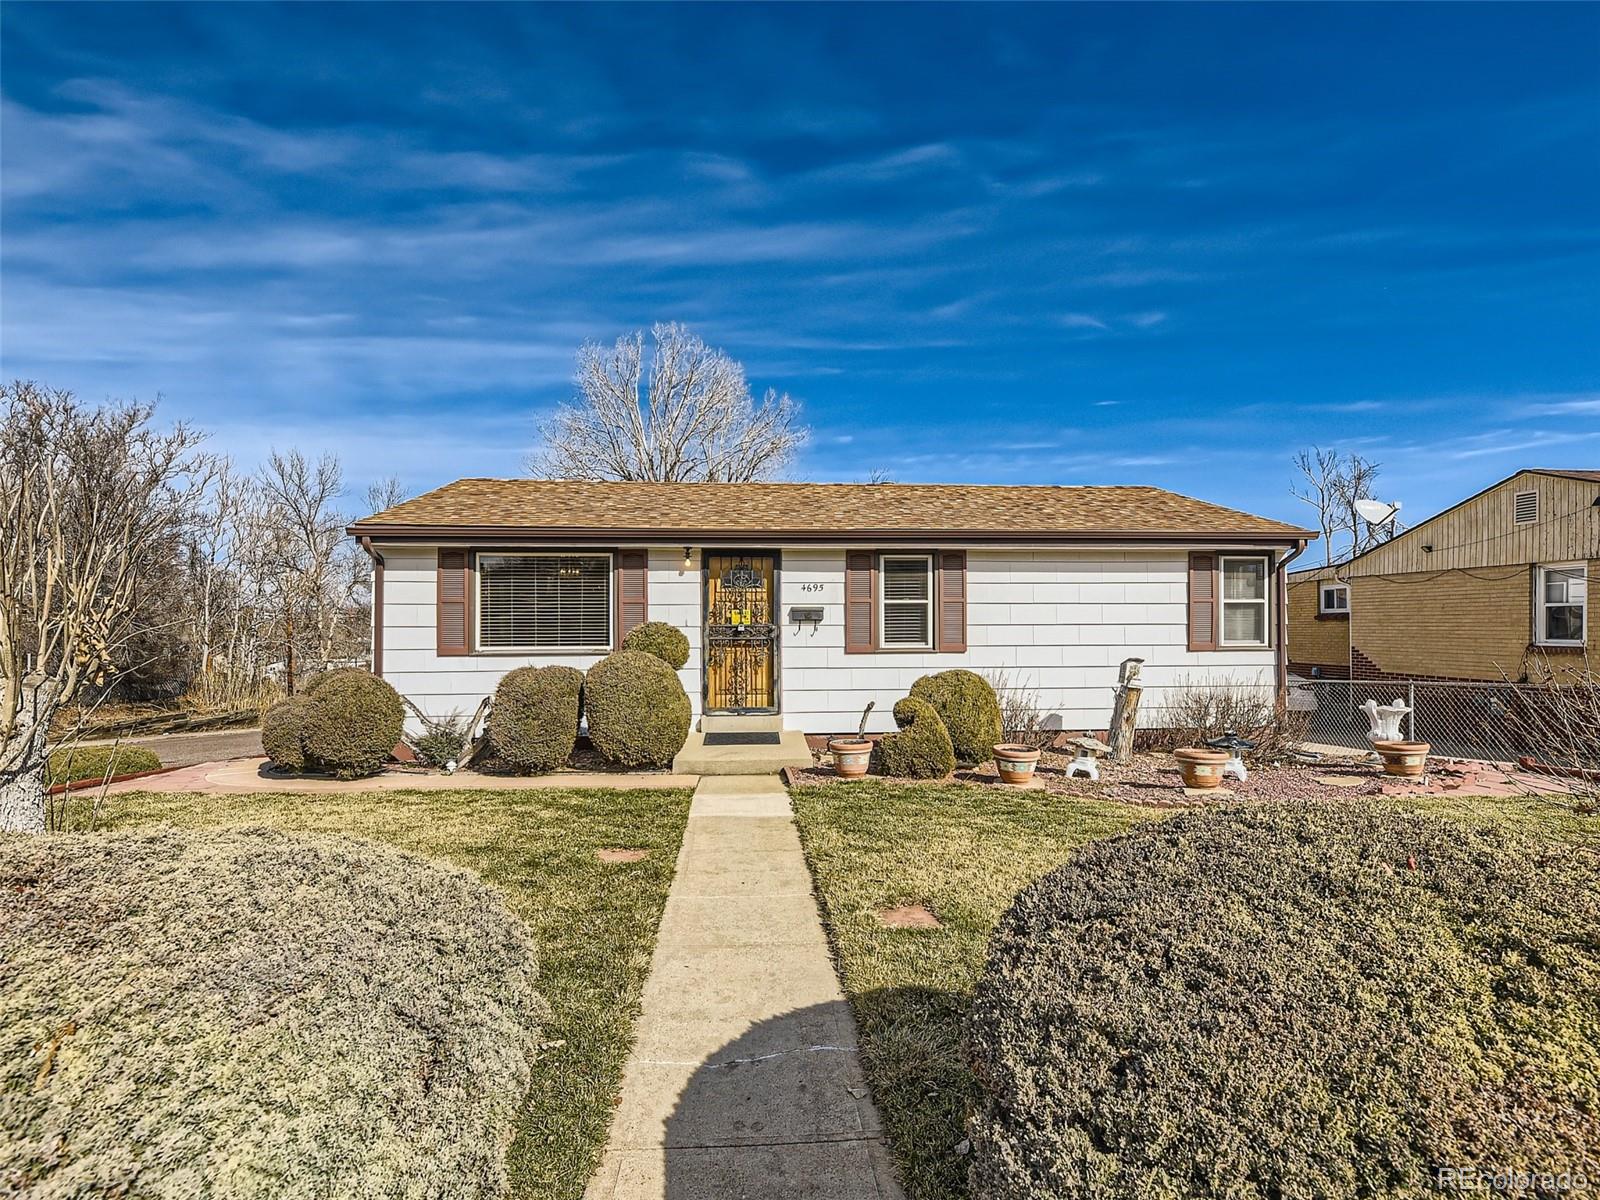 4695 w gill place, denver sold home. Closed on 2024-05-14 for $469,000.